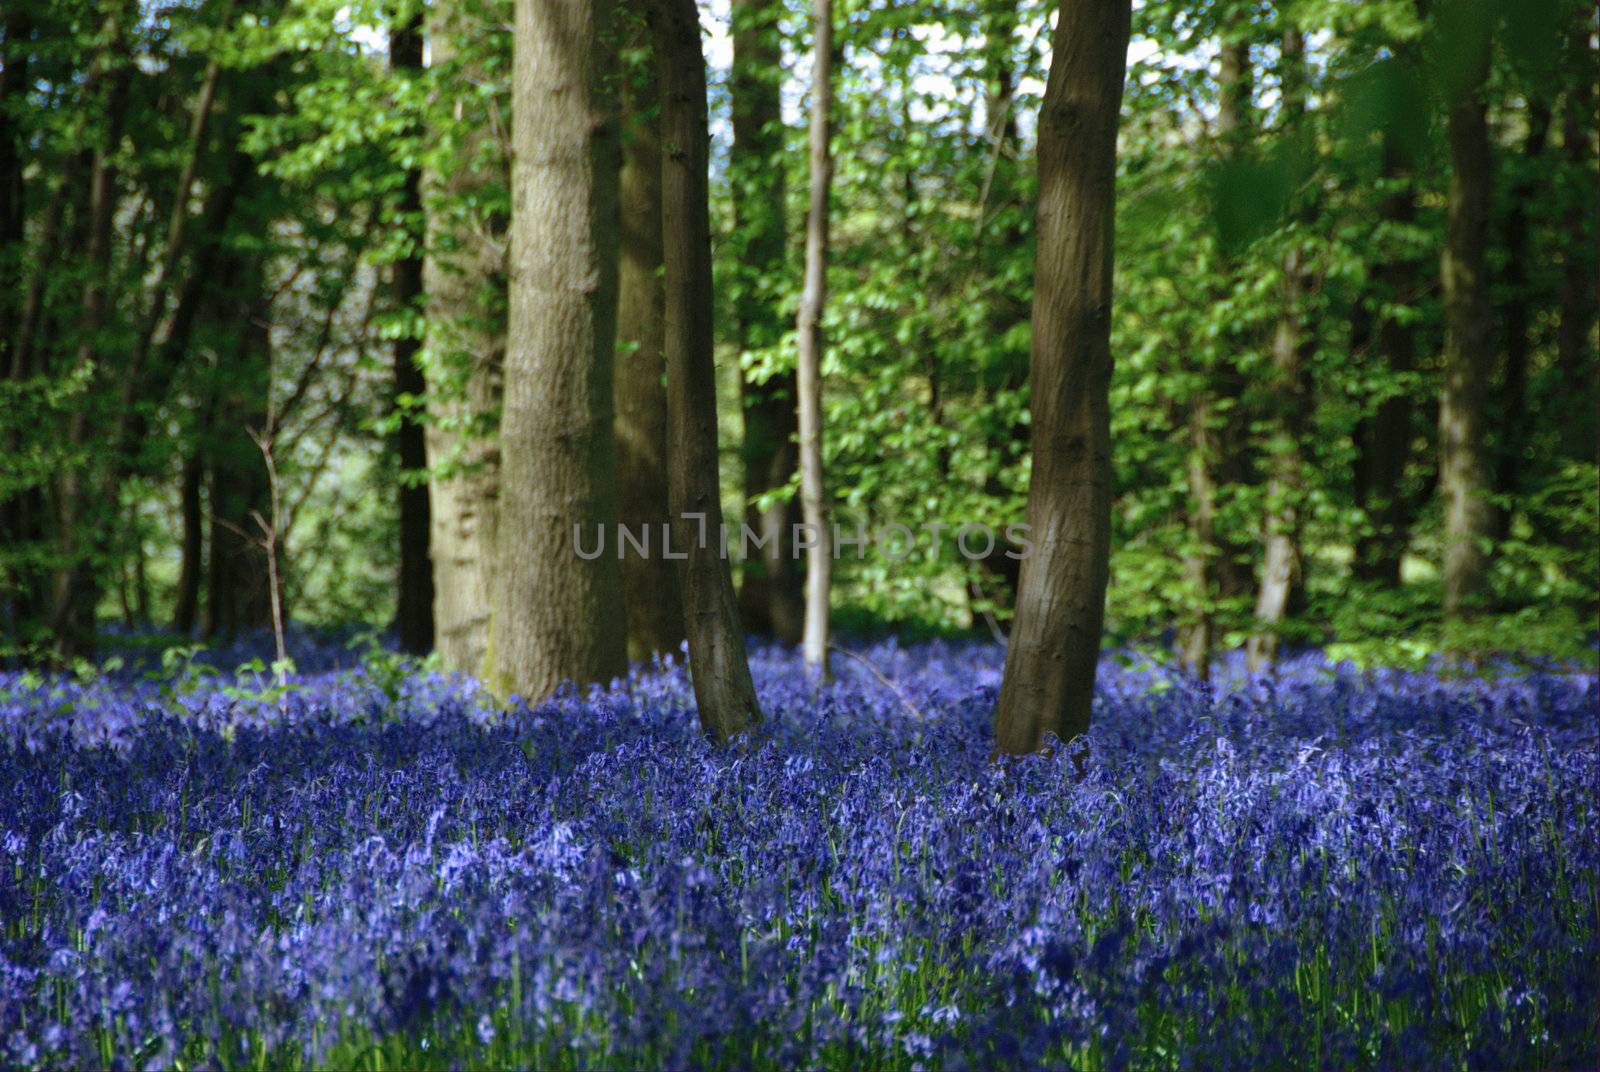 Bluebell woods by Jez22